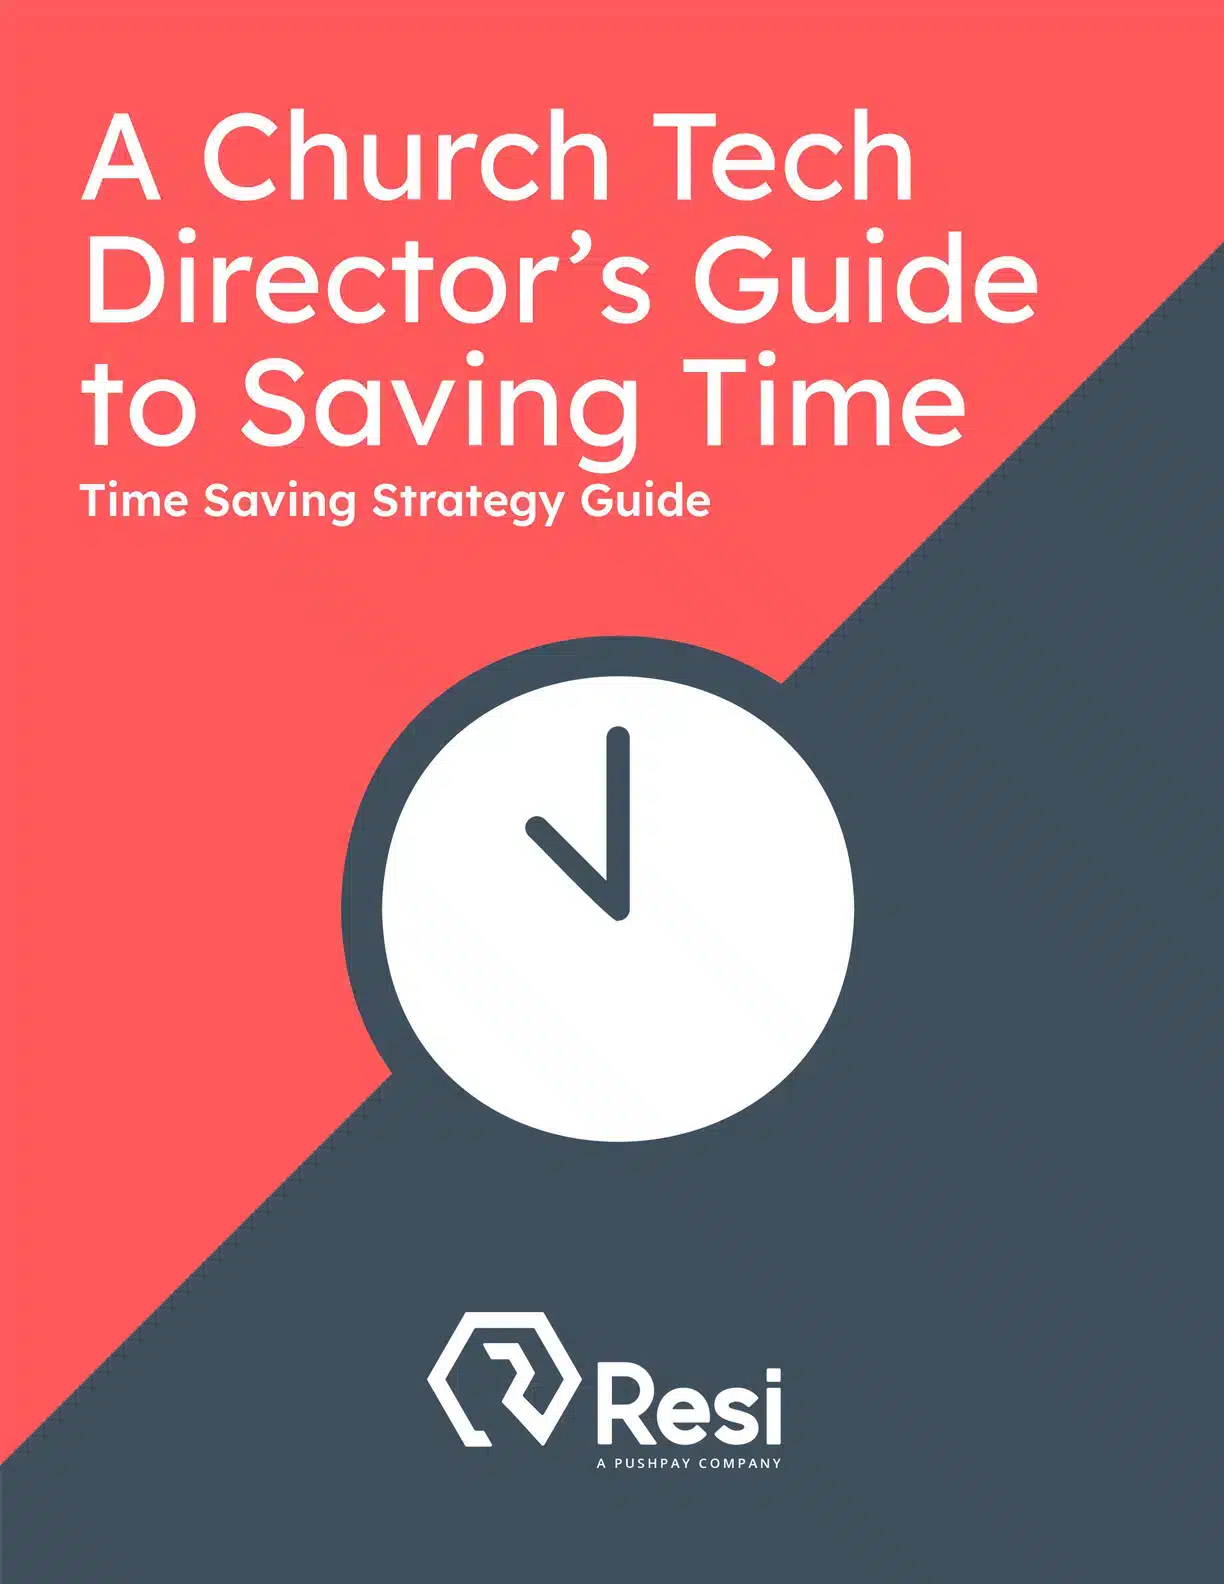 Taking Back Monday: A Church Tech Director’s Guide to Saving Time